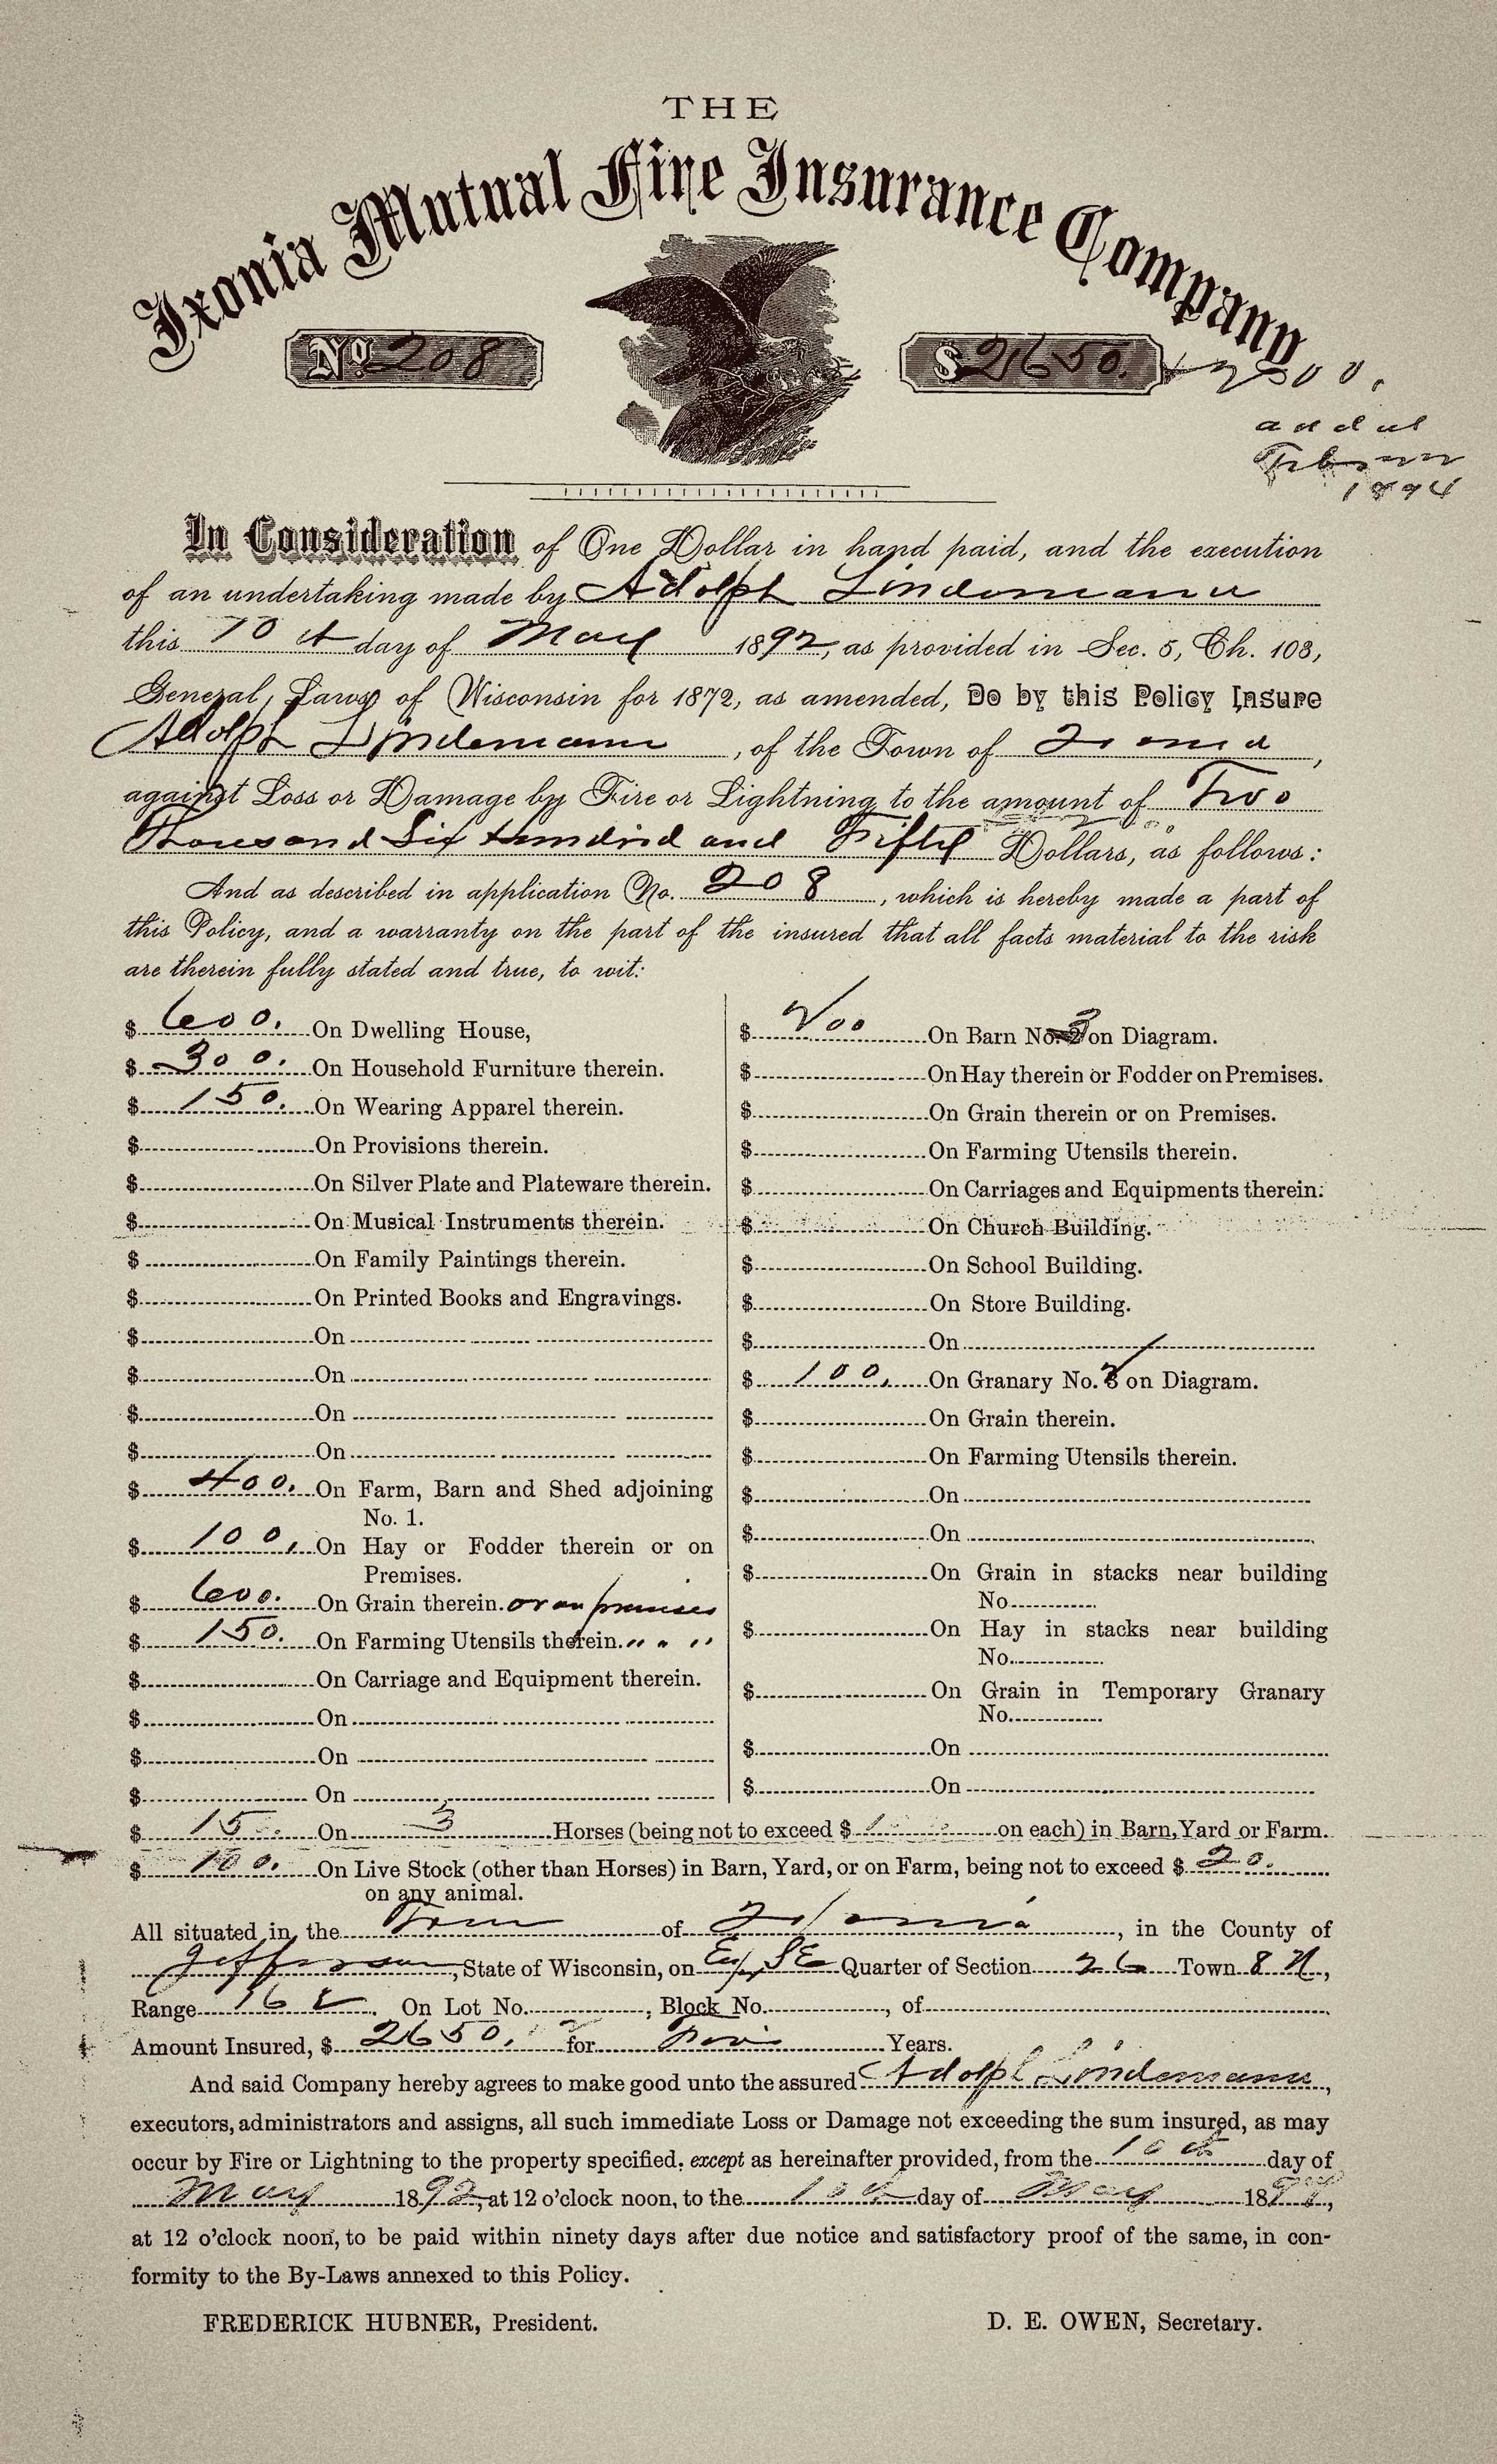 Ixonia Mutual Fire Insurance Company policy from 1892